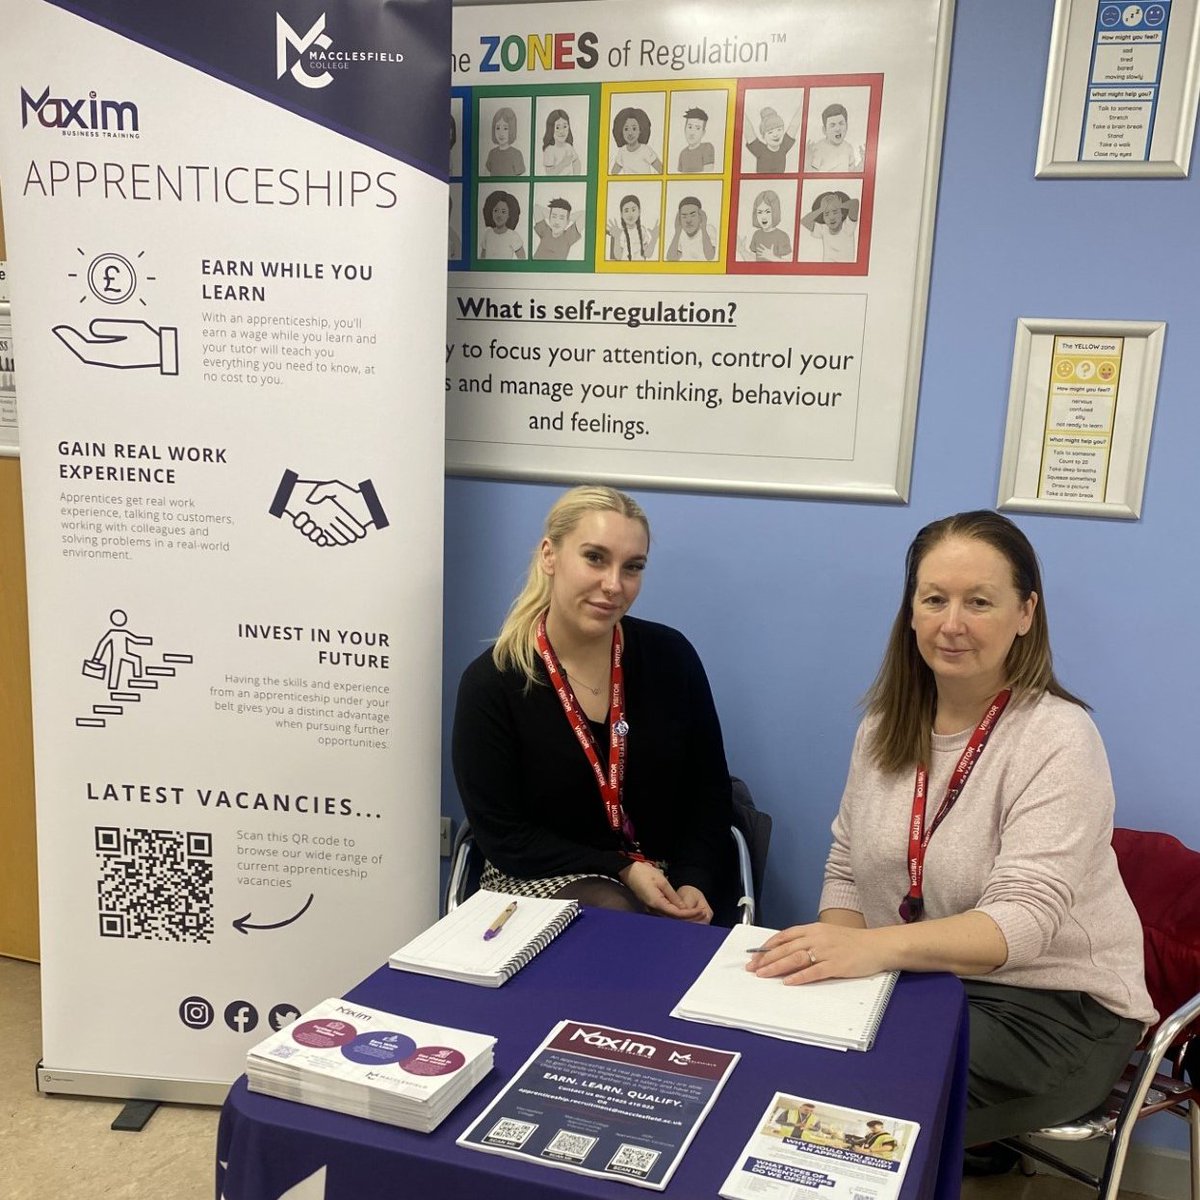 Our colleagues from Macclesfield College are all set up in the main reception to discuss all things Apprenticeships. Pop along at lunch time to find out more! #AcademicExcellence #learningaboveall #KnownandValued